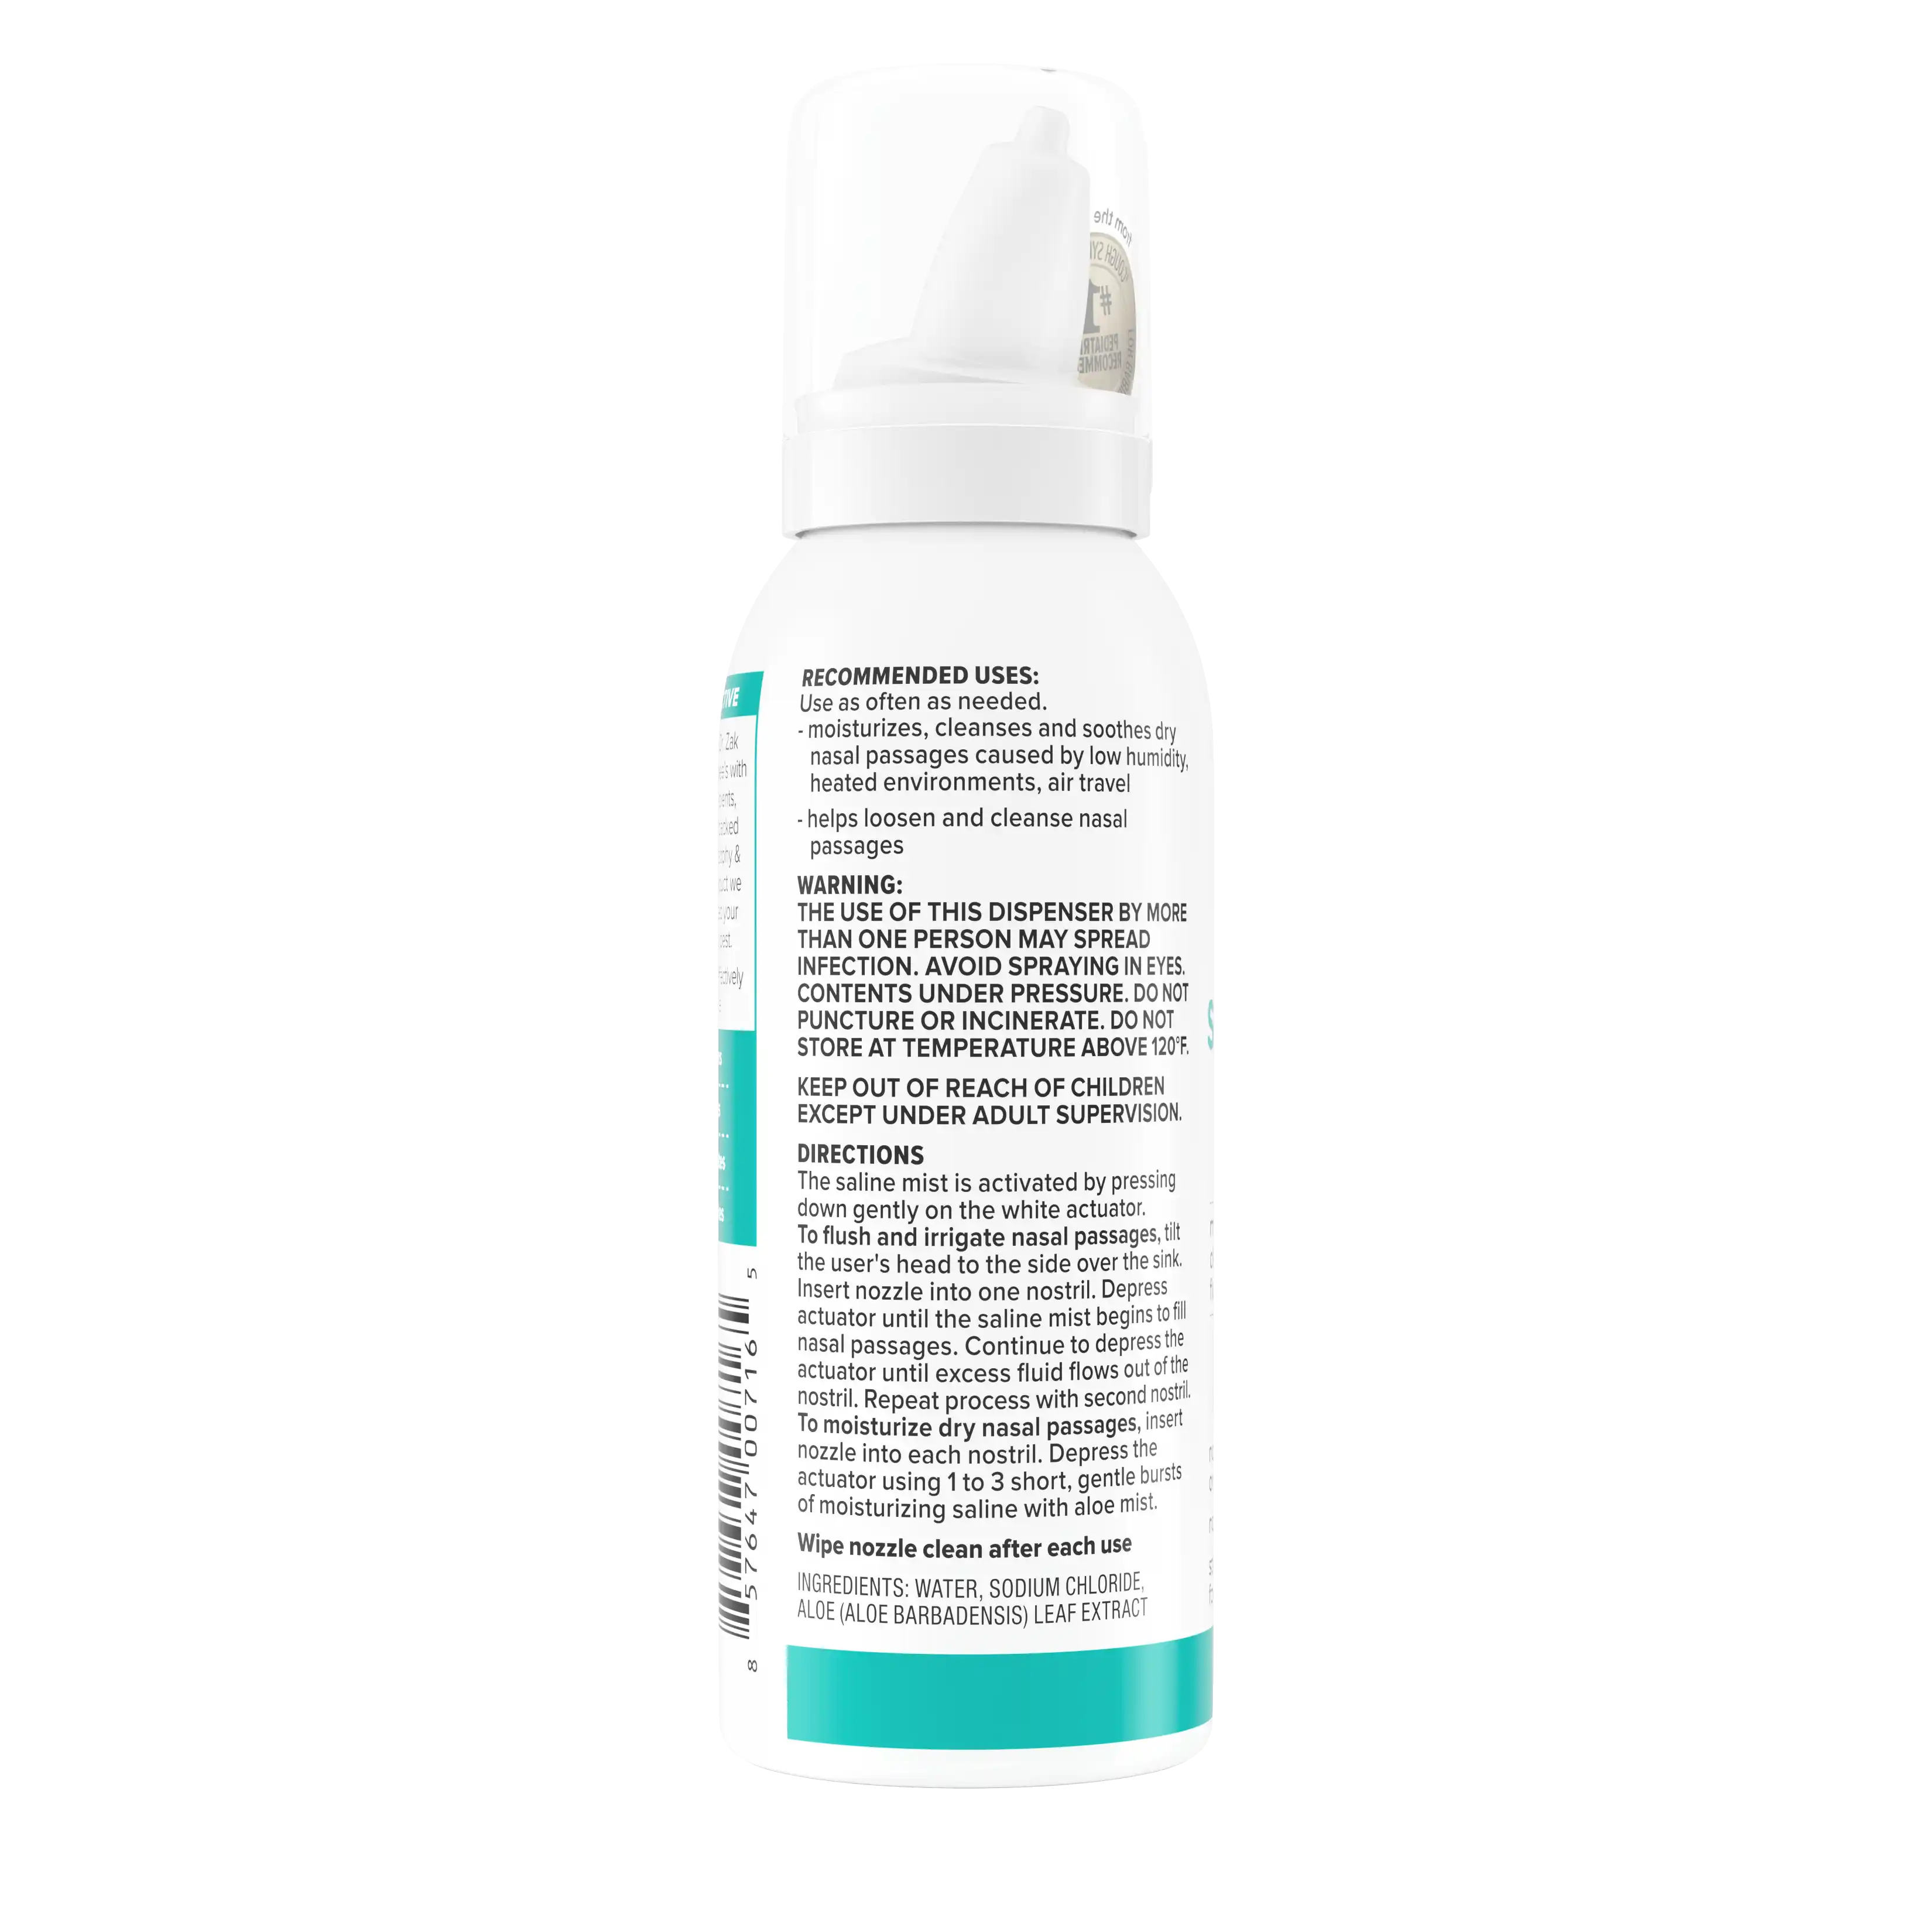 https://www.zarbees.com/sites/zarbees_us/files/product-images/zar_857647007165_us_soothing_saline_nasal_mist_with_aloe_3oz_00135.webp